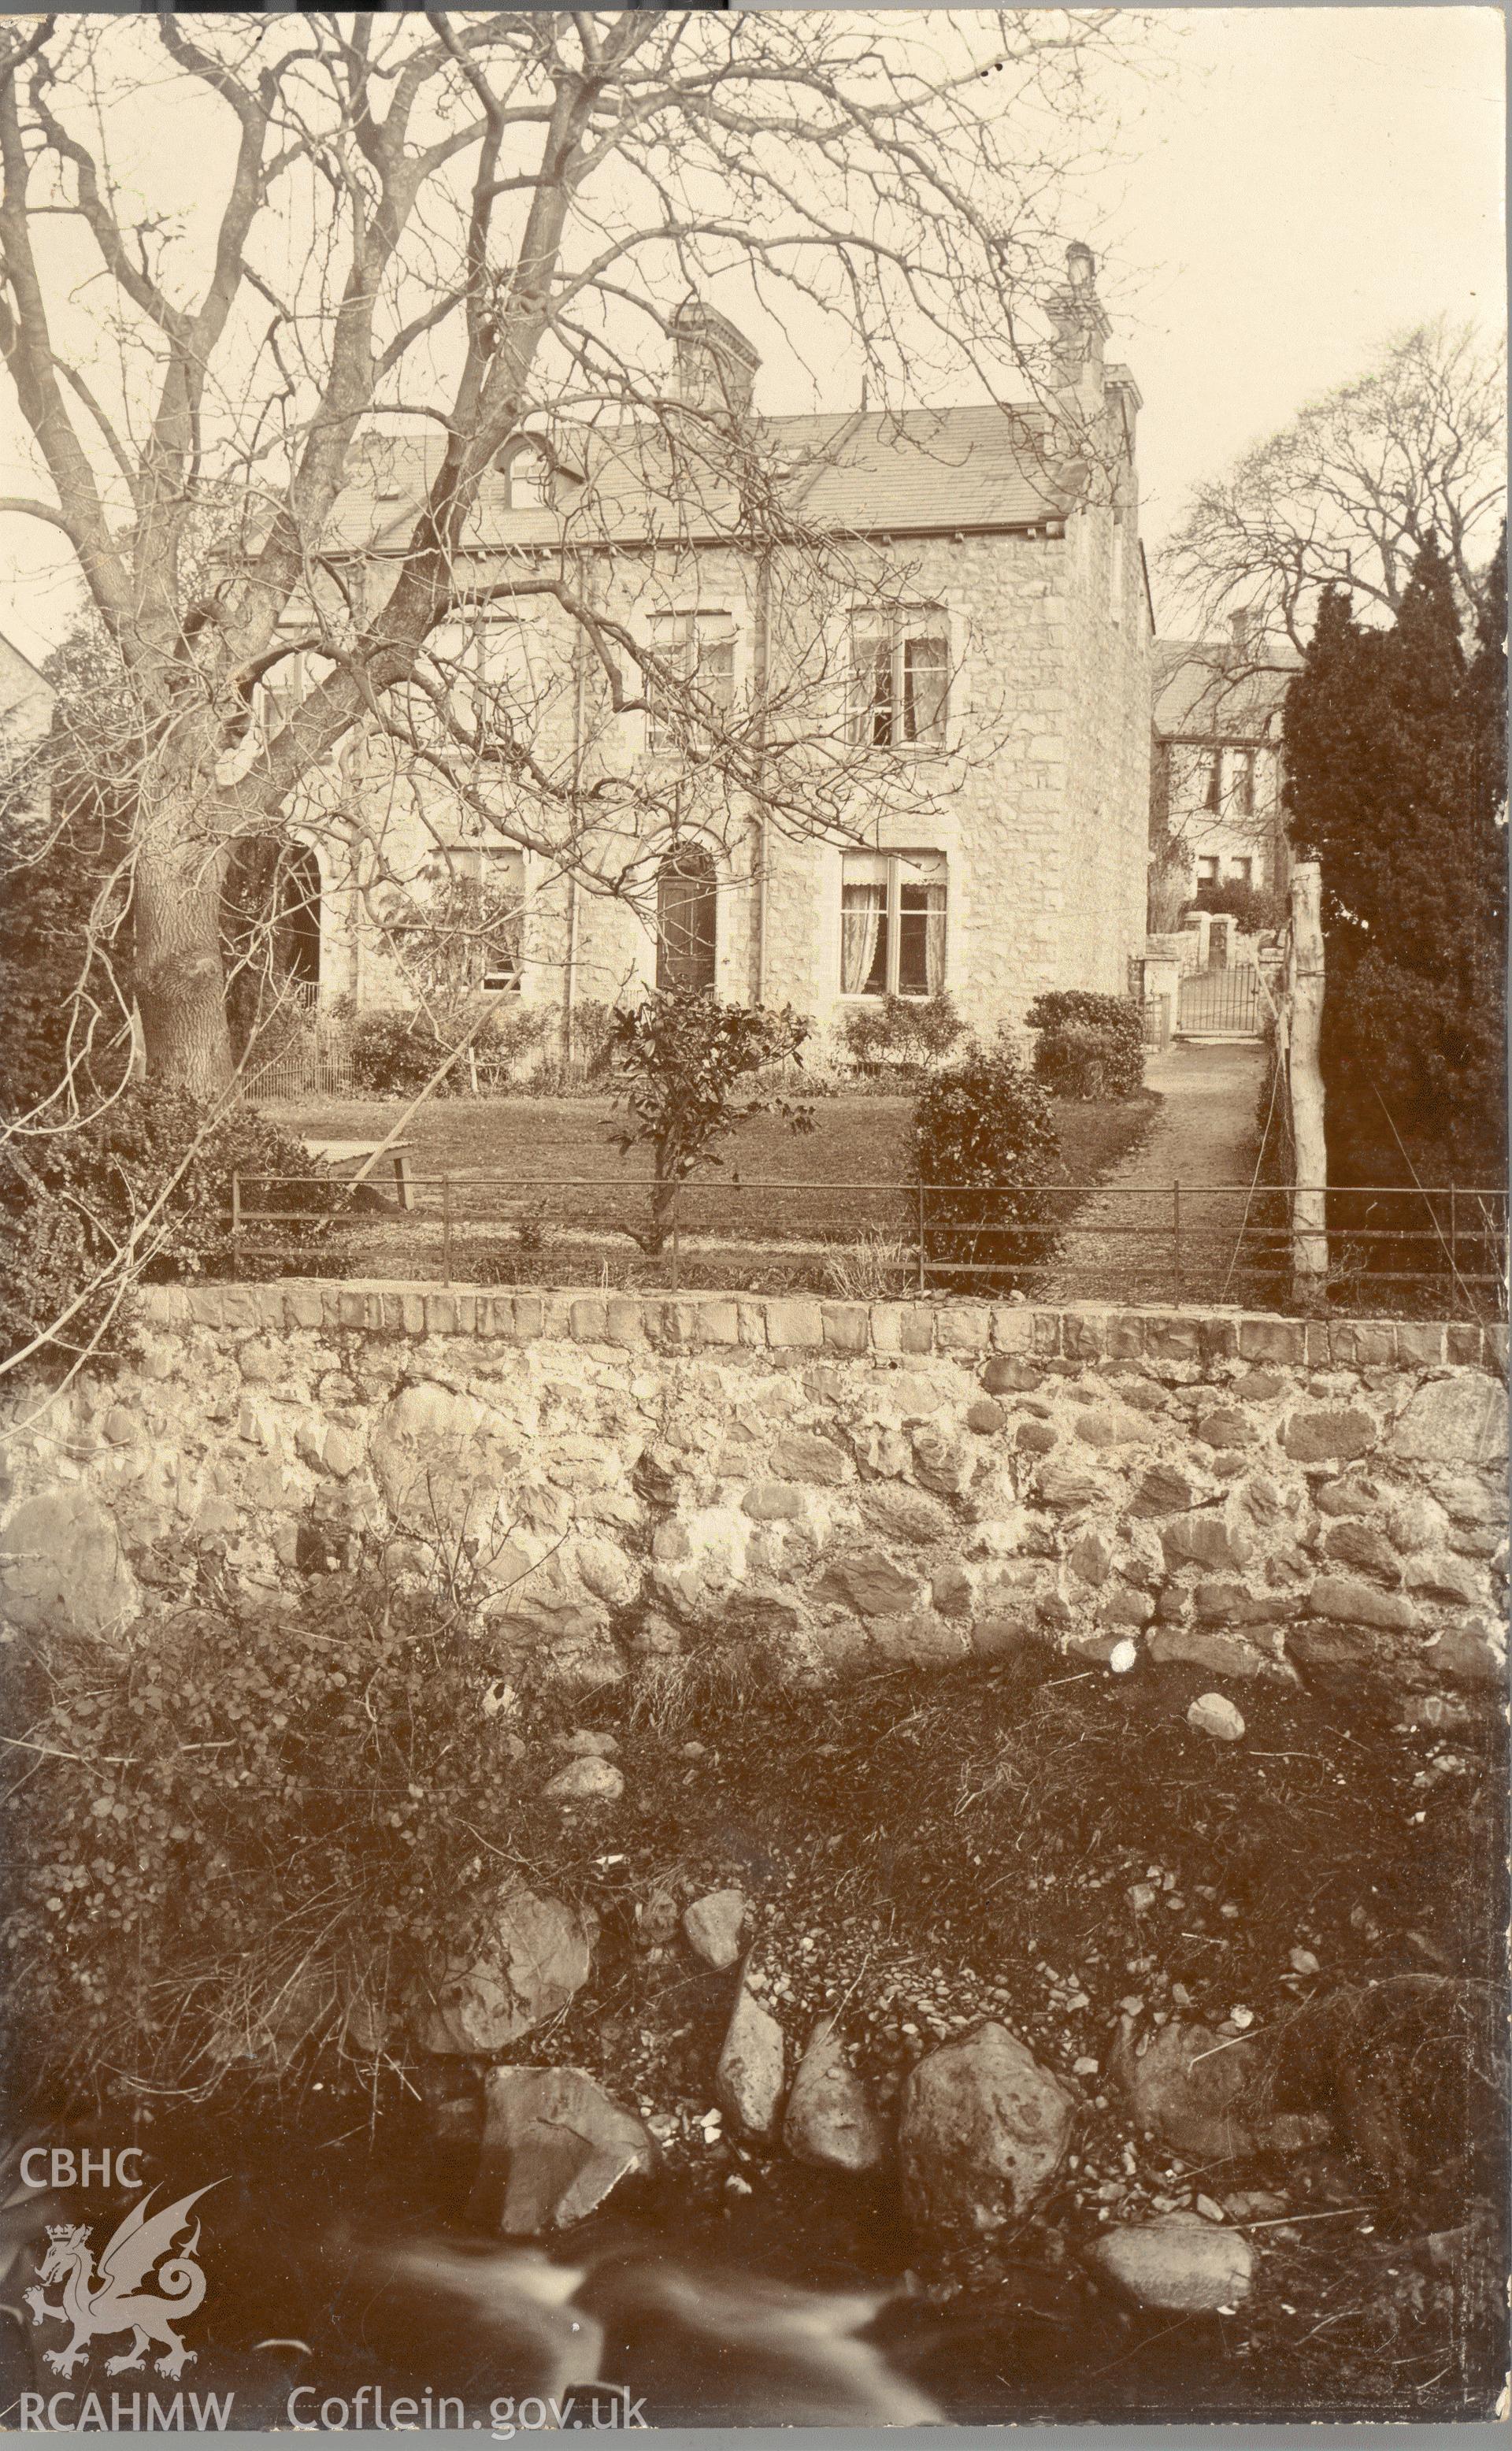 Digitised postcard image of unidentified house, Llanfairfechan, G. Thomas, Llanfairfechan. Produced by Parks and Gardens Data Services, from an original item in the Peter Davis Collection at Parks and Gardens UK. We hold only web-resolution images of this collection, suitable for viewing on screen and for research purposes only. We do not hold the original images, or publication quality scans.